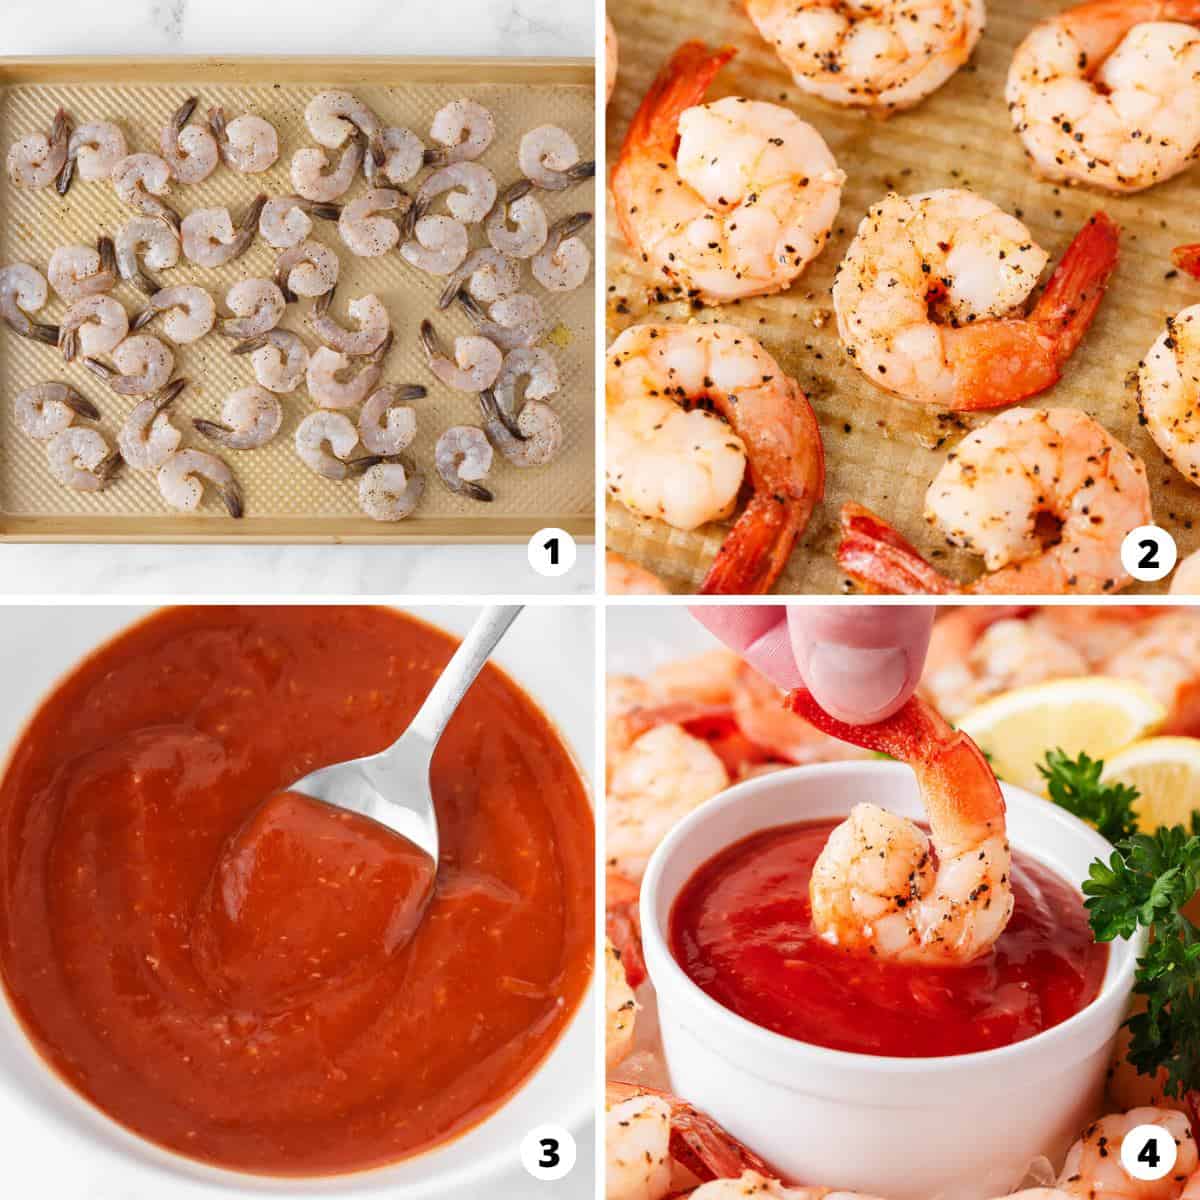 Showing how to make shrimp cocktail in a 4 step collage.